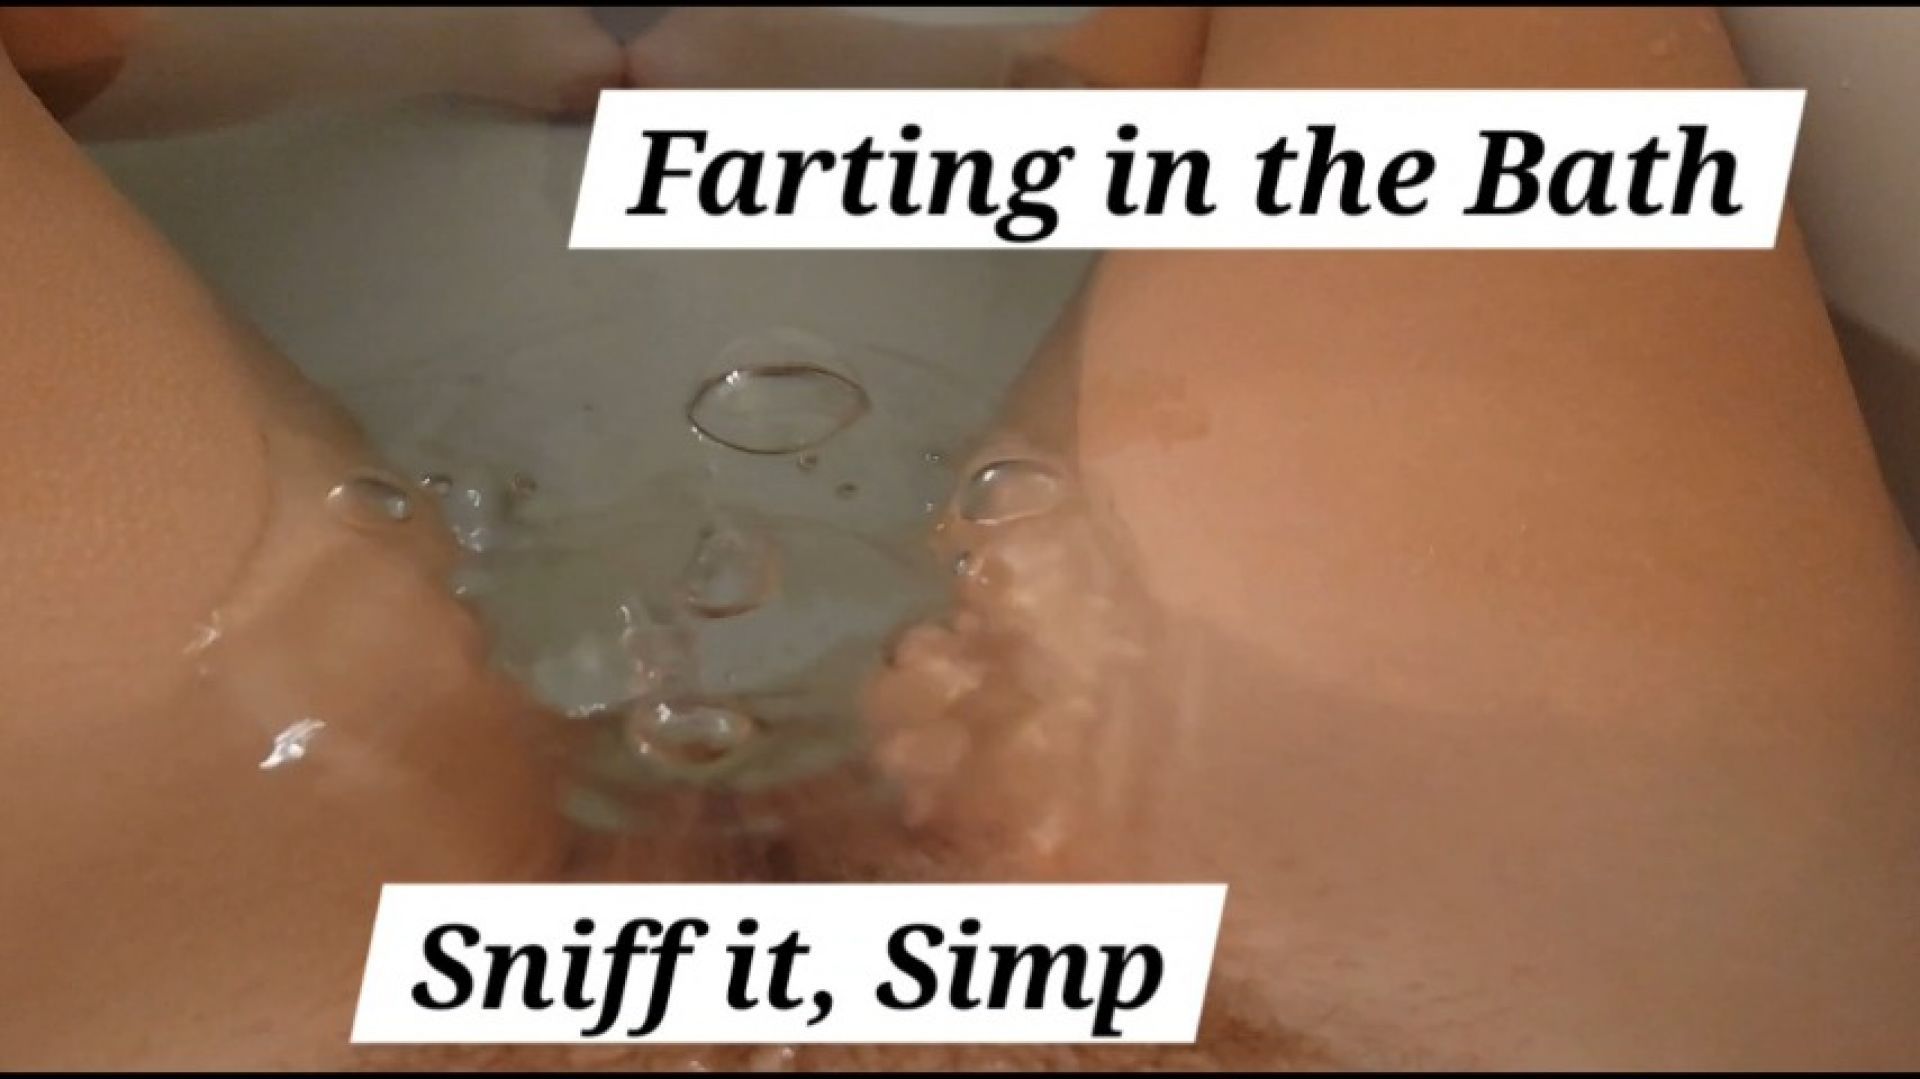 Farting in the bath - sniff it, simp